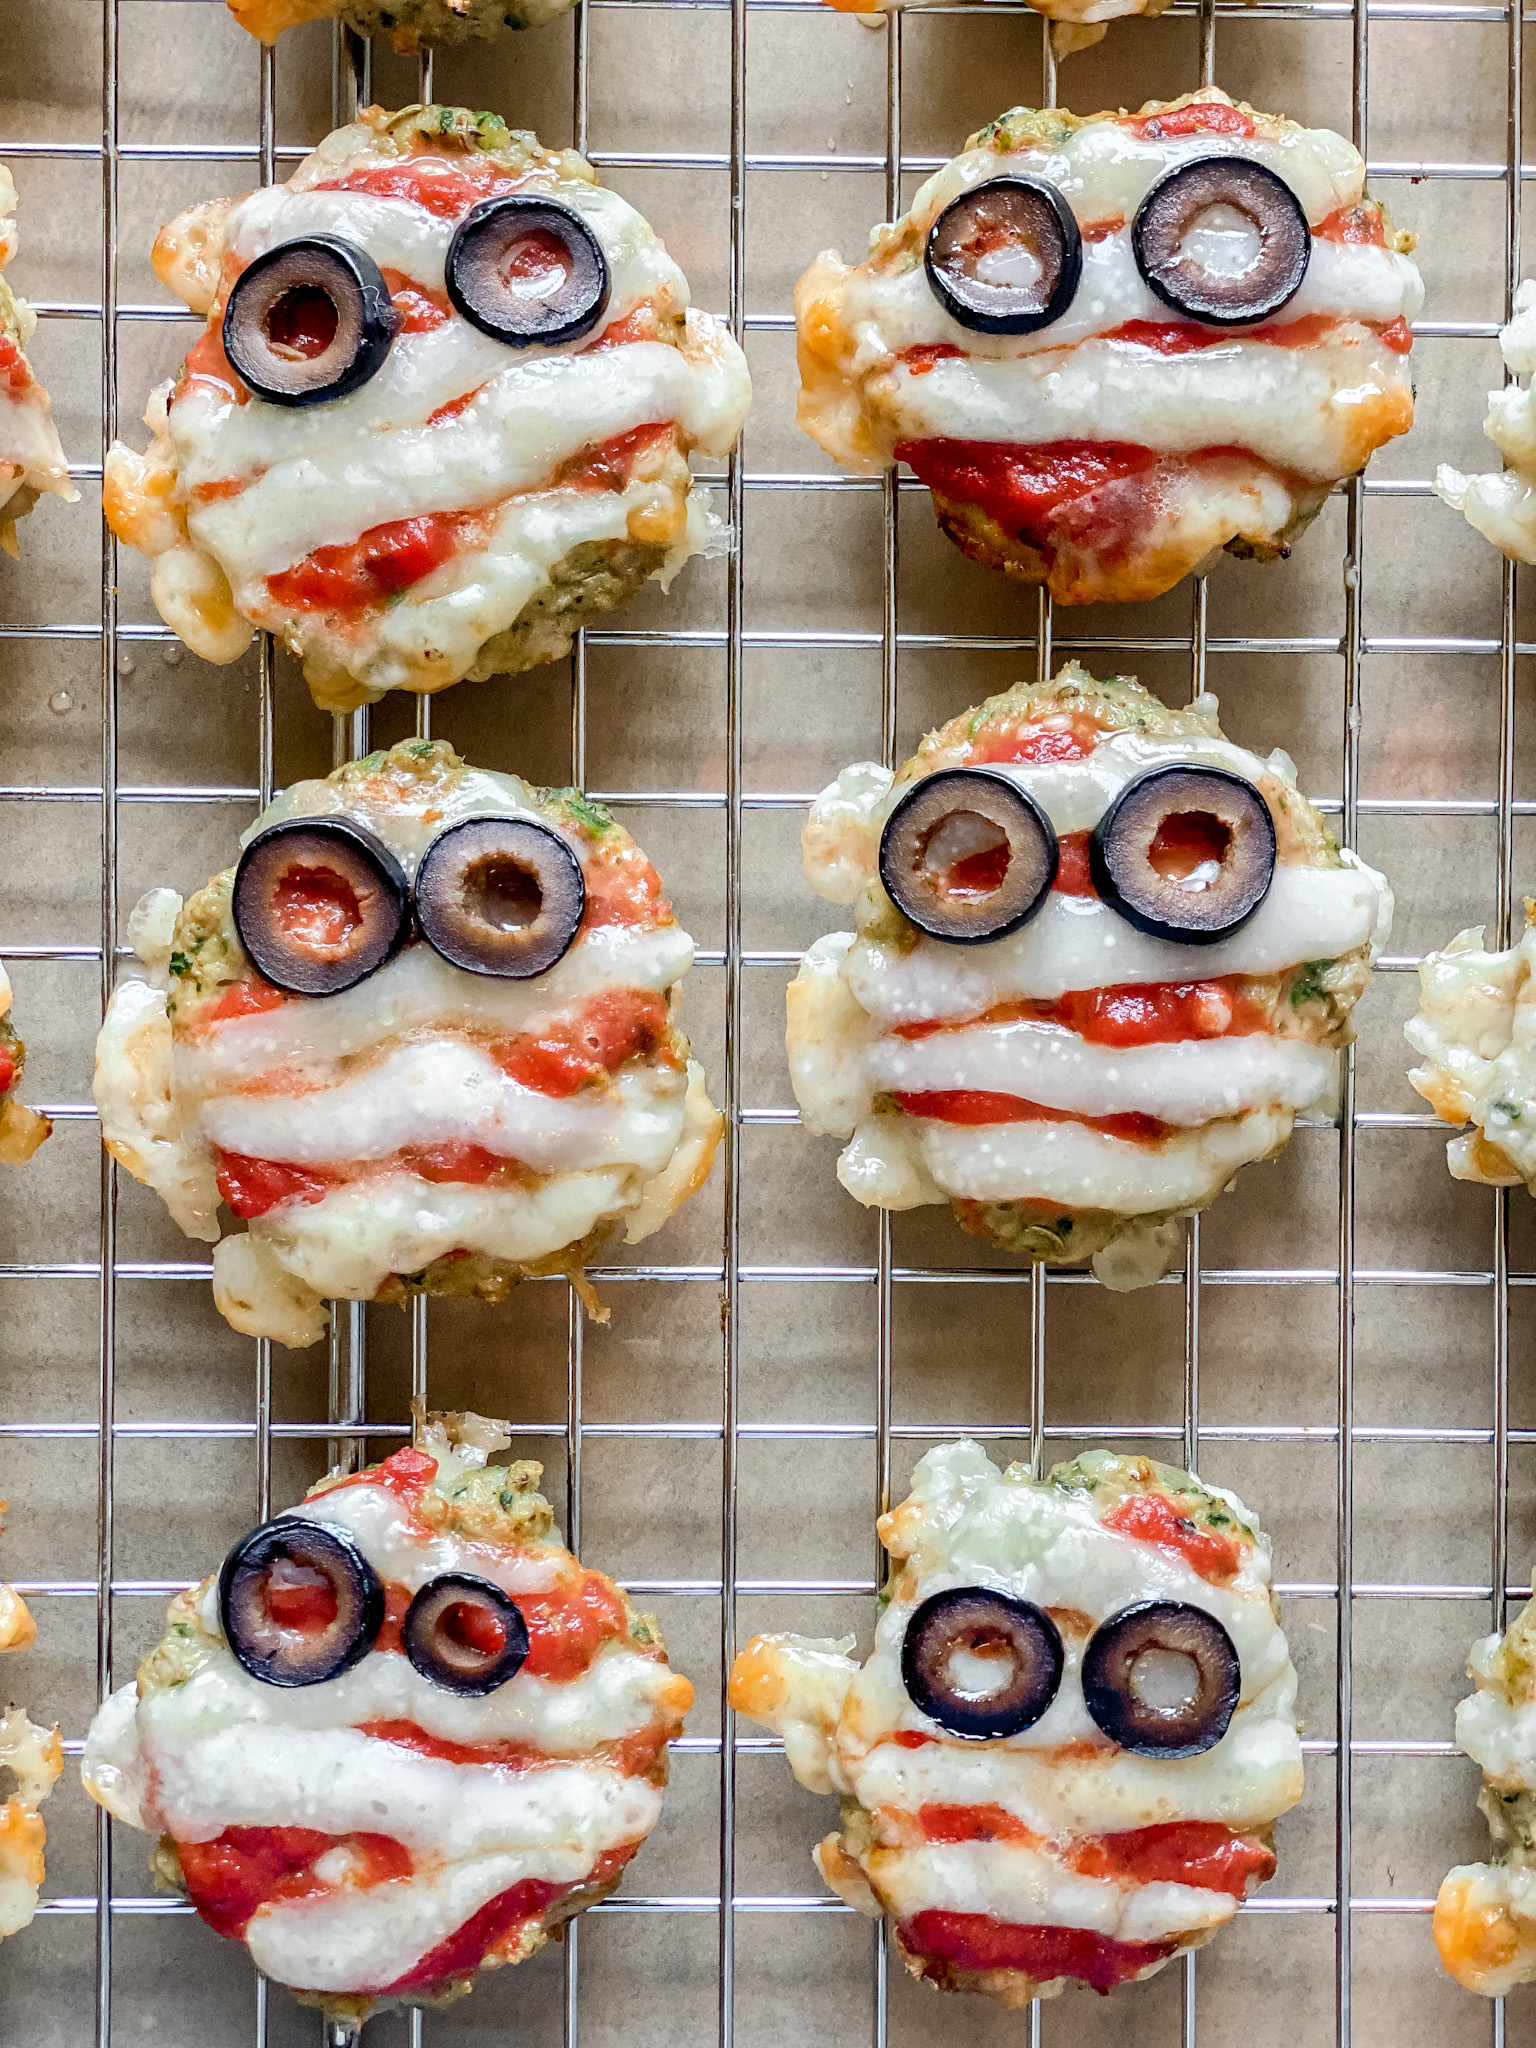 6 sausage patties with cheese strip and olives for eyes to make a "mummy"